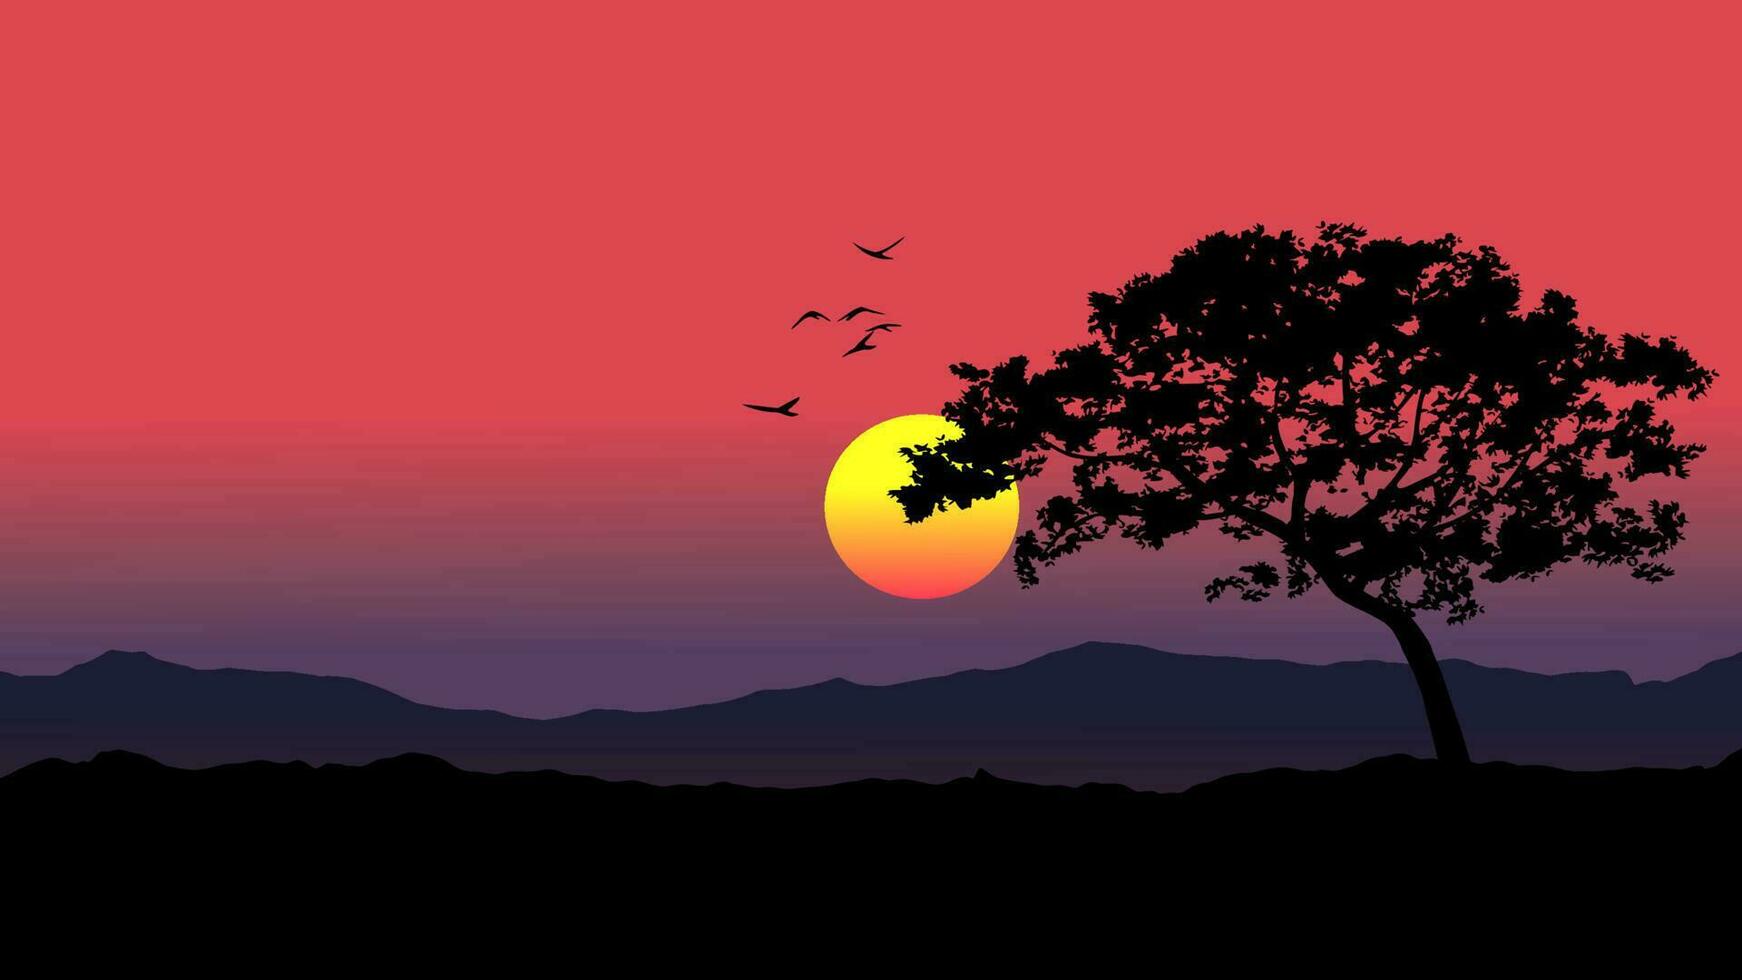 Vectpr sunset scene with a tree and flying birds in silhouette with sun and mountain in background vector